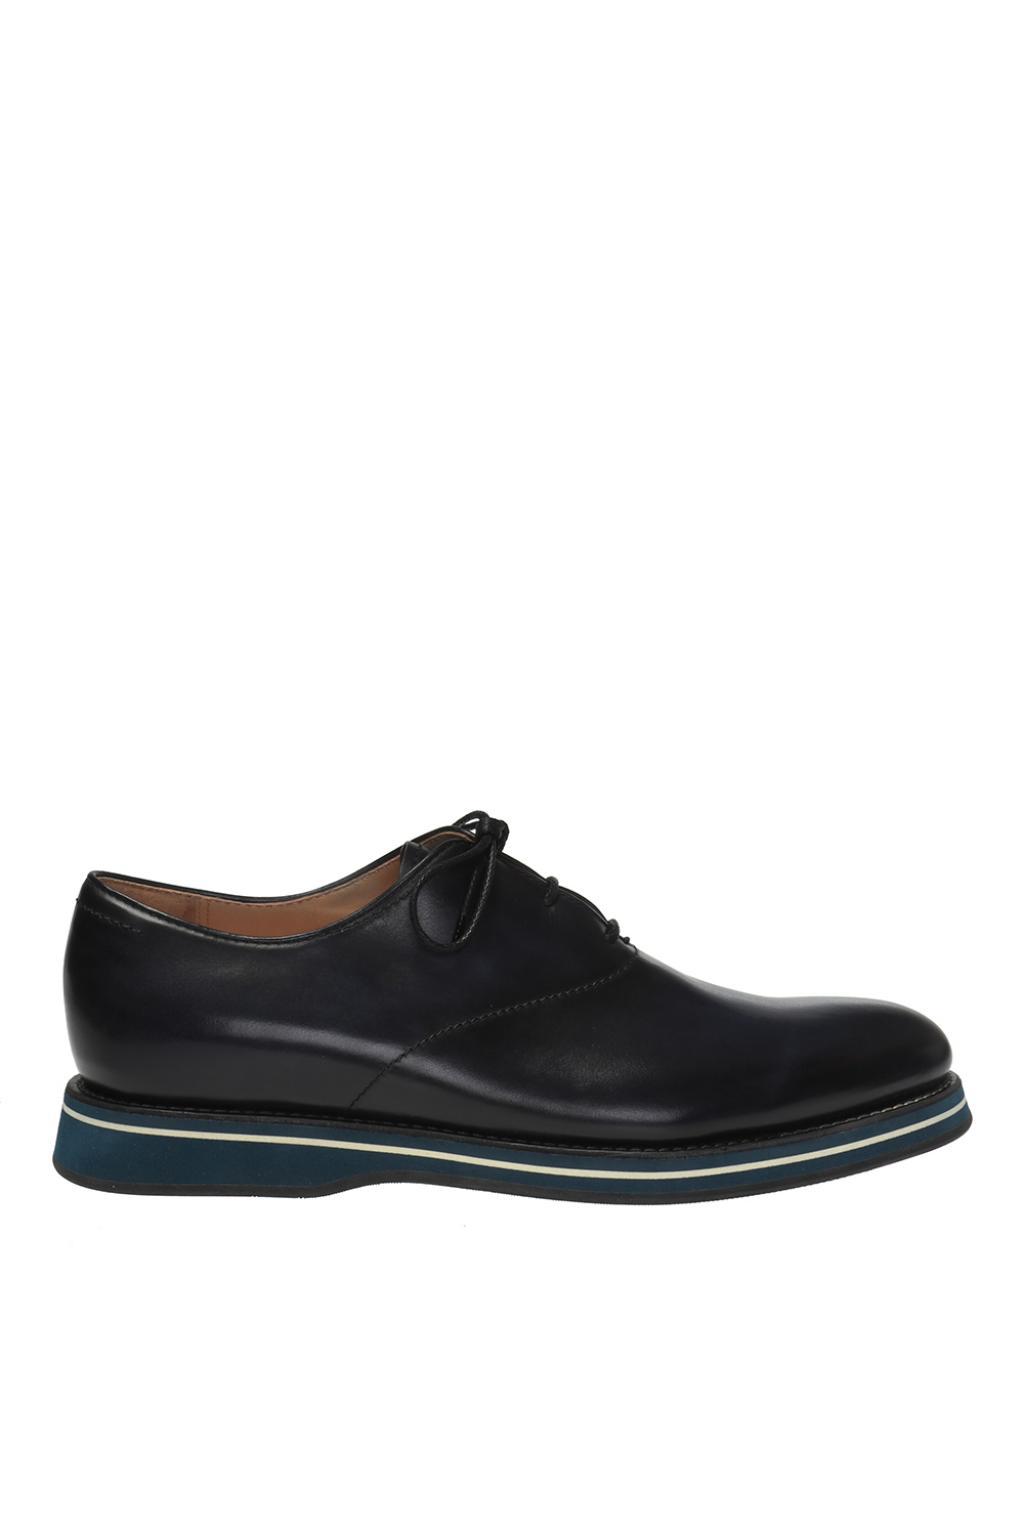 Berluti Leather 'padova' Oxford Shoes in Navy Blue (Blue) for Men - Lyst